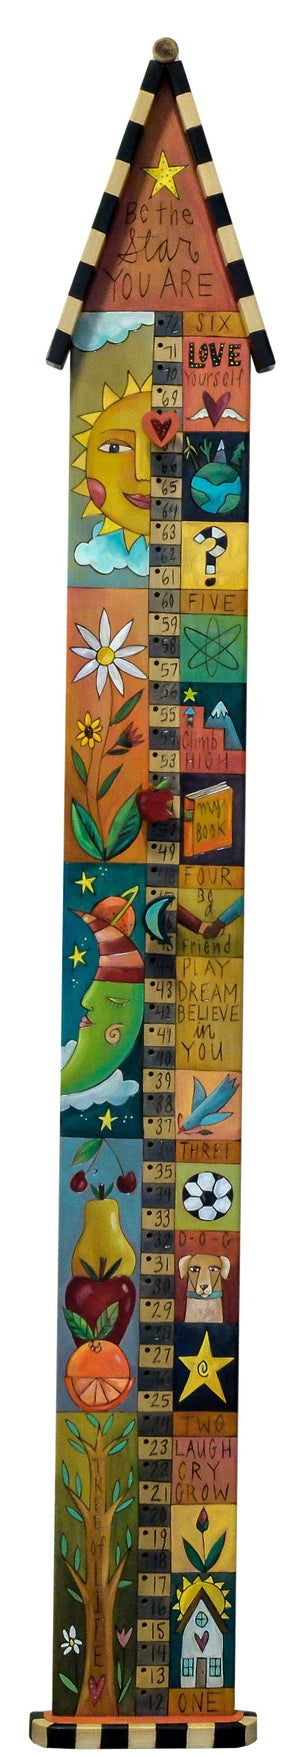 Growth Chart with Pegs – "Be the star you are" growth chart painted in a beautiful and earthy elegant palette